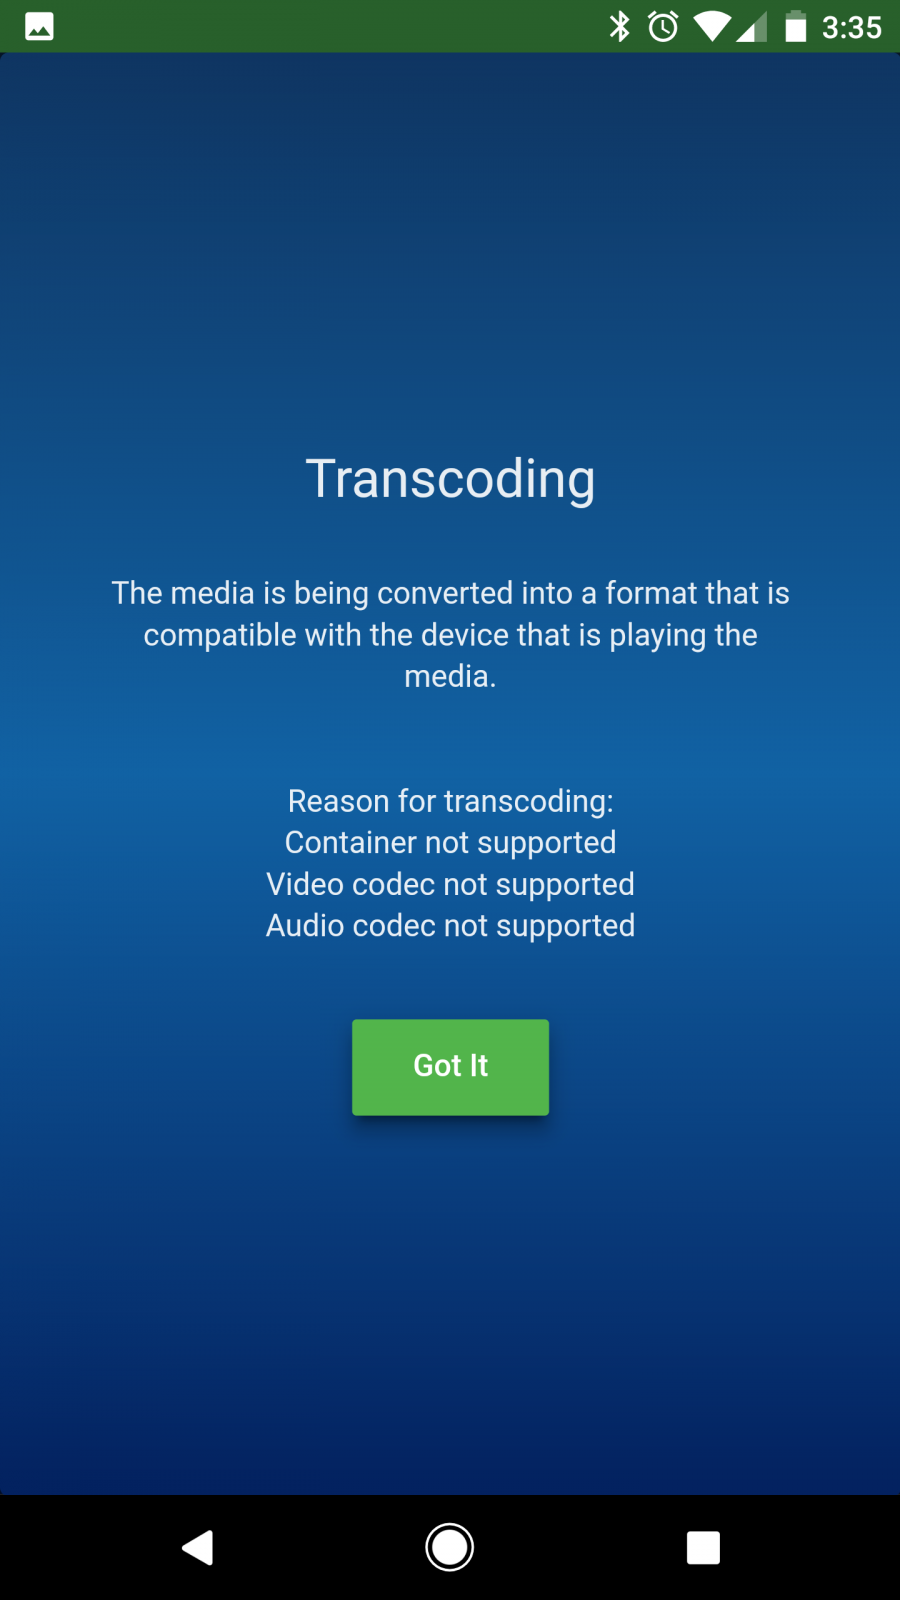 Live Tvu003d Direct Play; Recorded Tvu003d Transcoding - Android TV / Fire TV